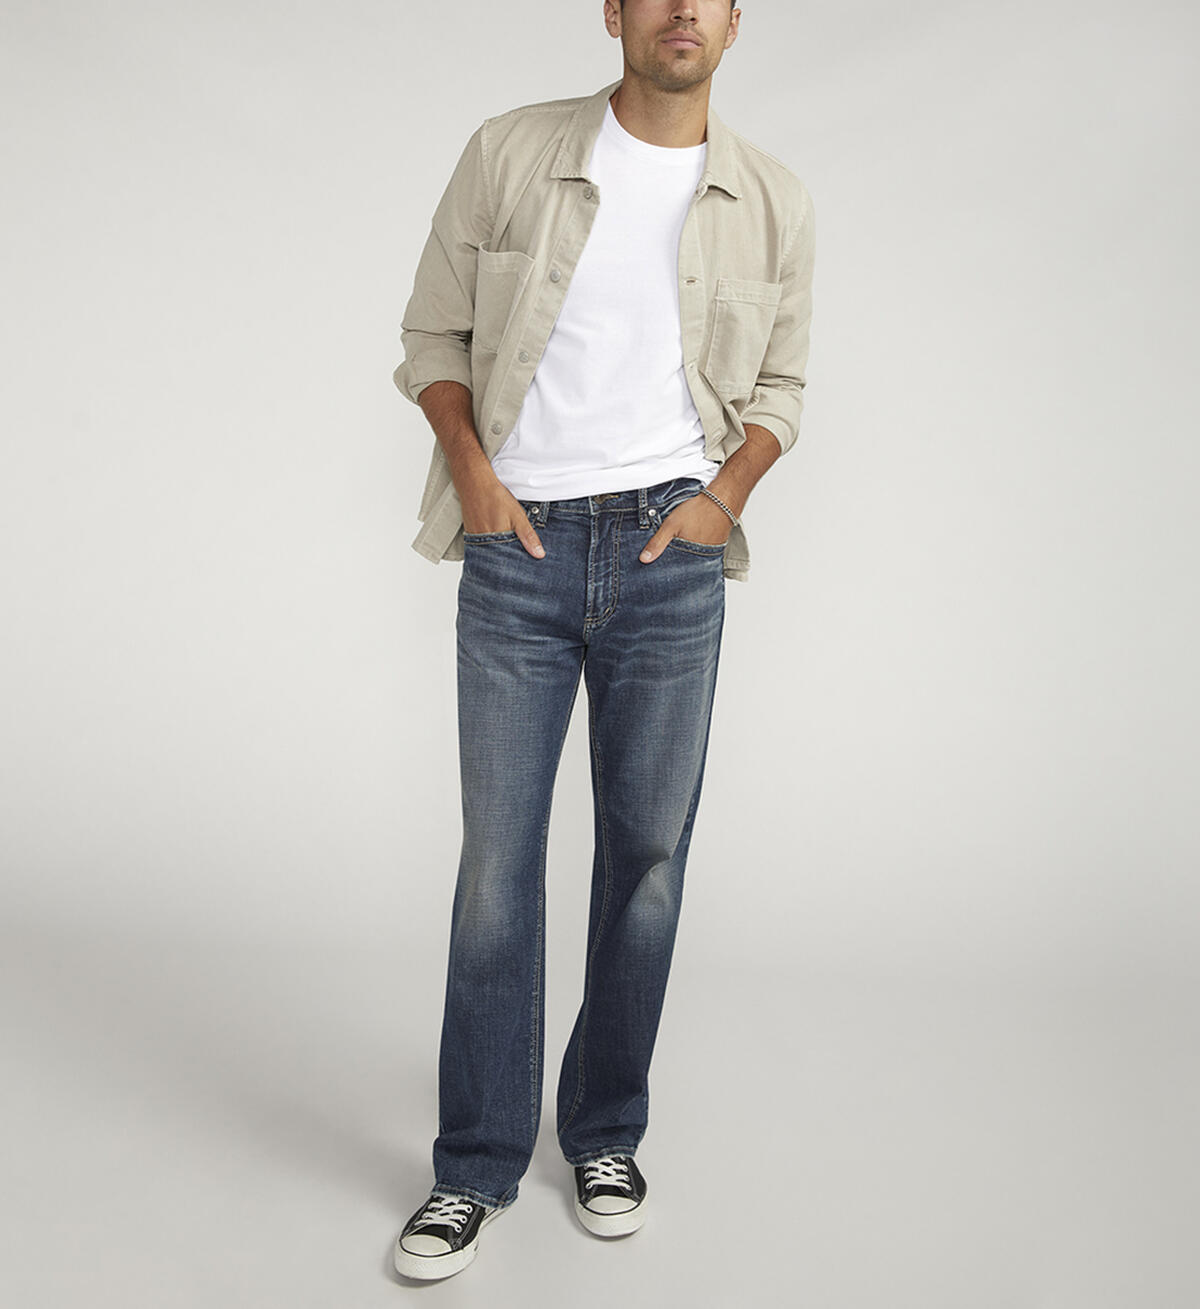 Gordie Relaxed Fit Straight Leg Jeans, Indigo, hi-res image number 0